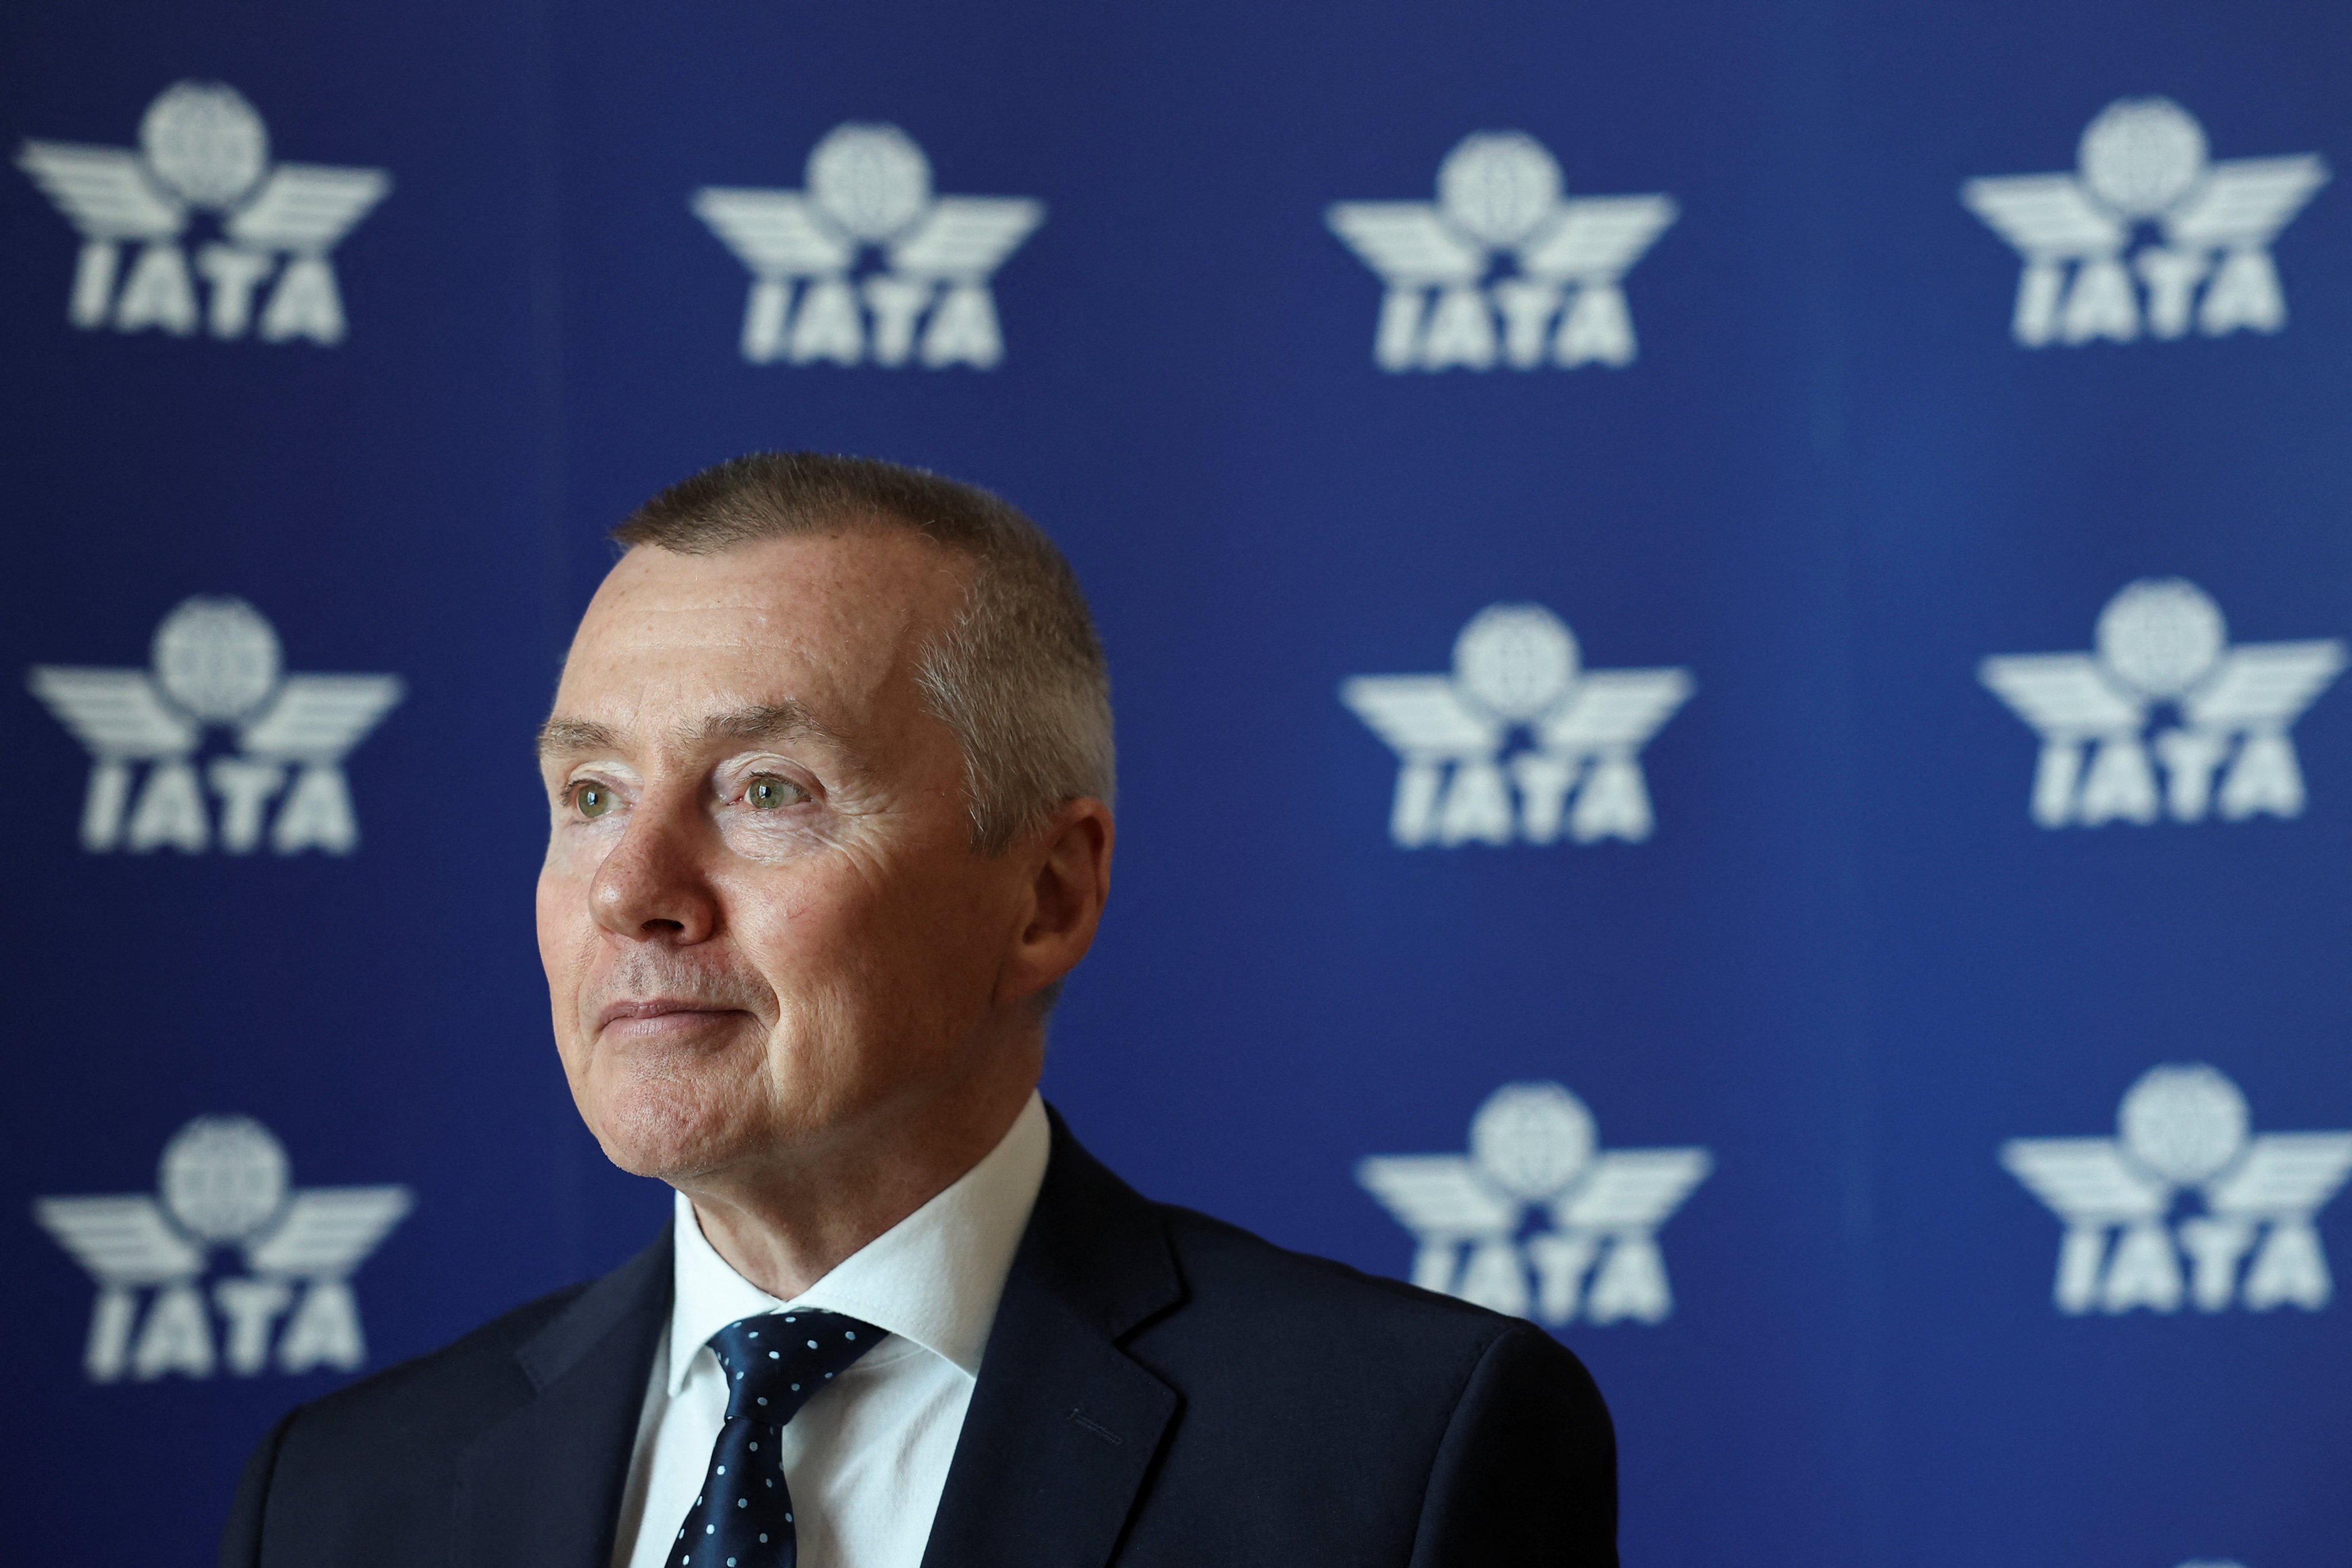 IATA director general Willie Walsh pledges the global airline body will work to improve safety after turbulence incidents. Photo: Reuters